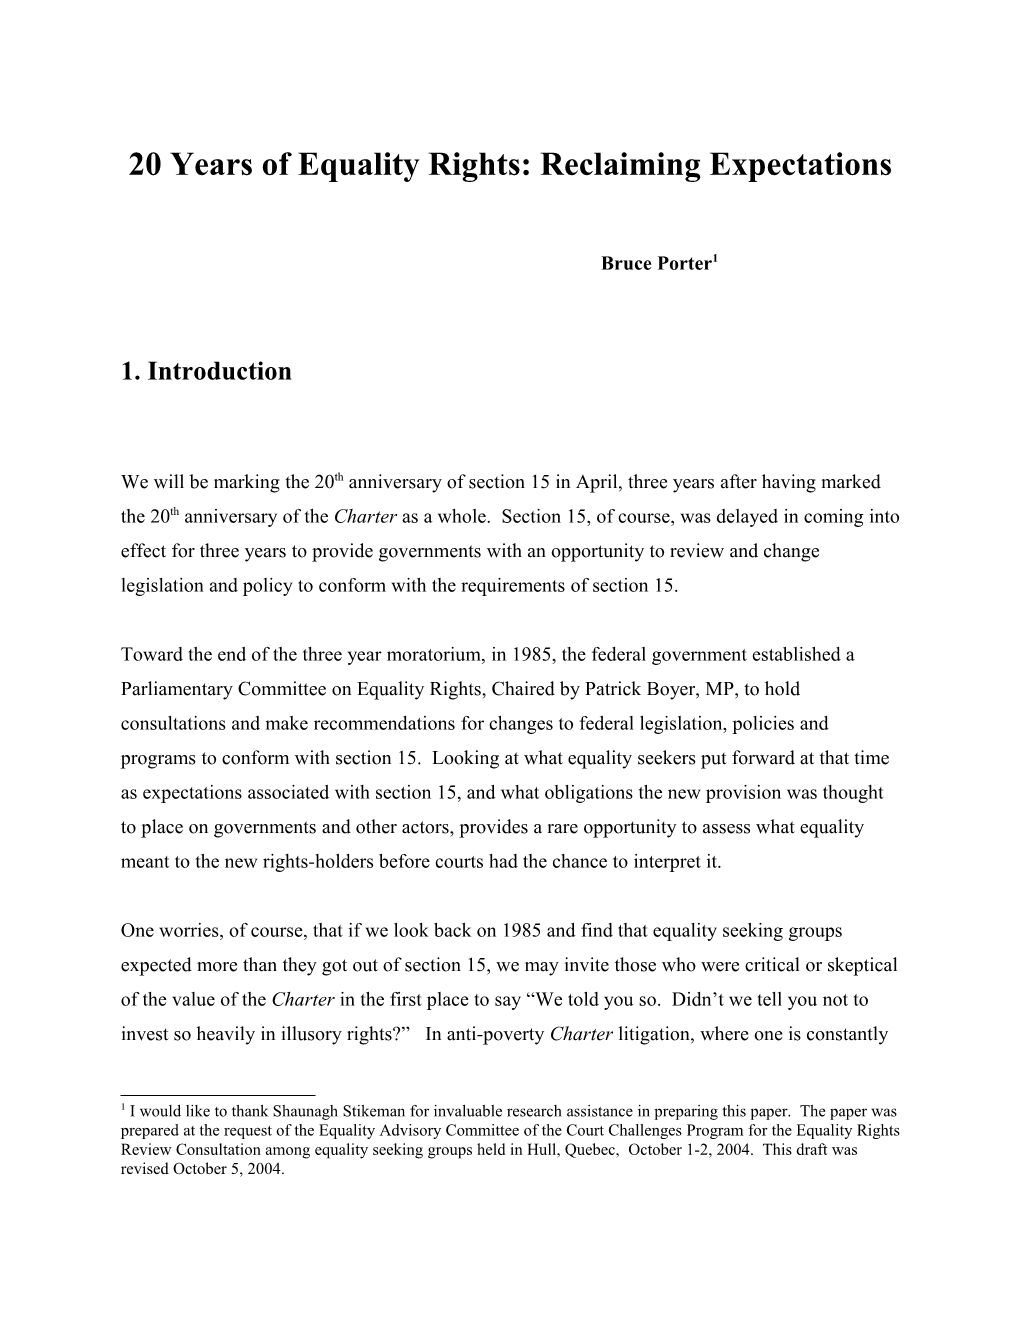 20 Years of Equality Rights: Reclaiming Expectations